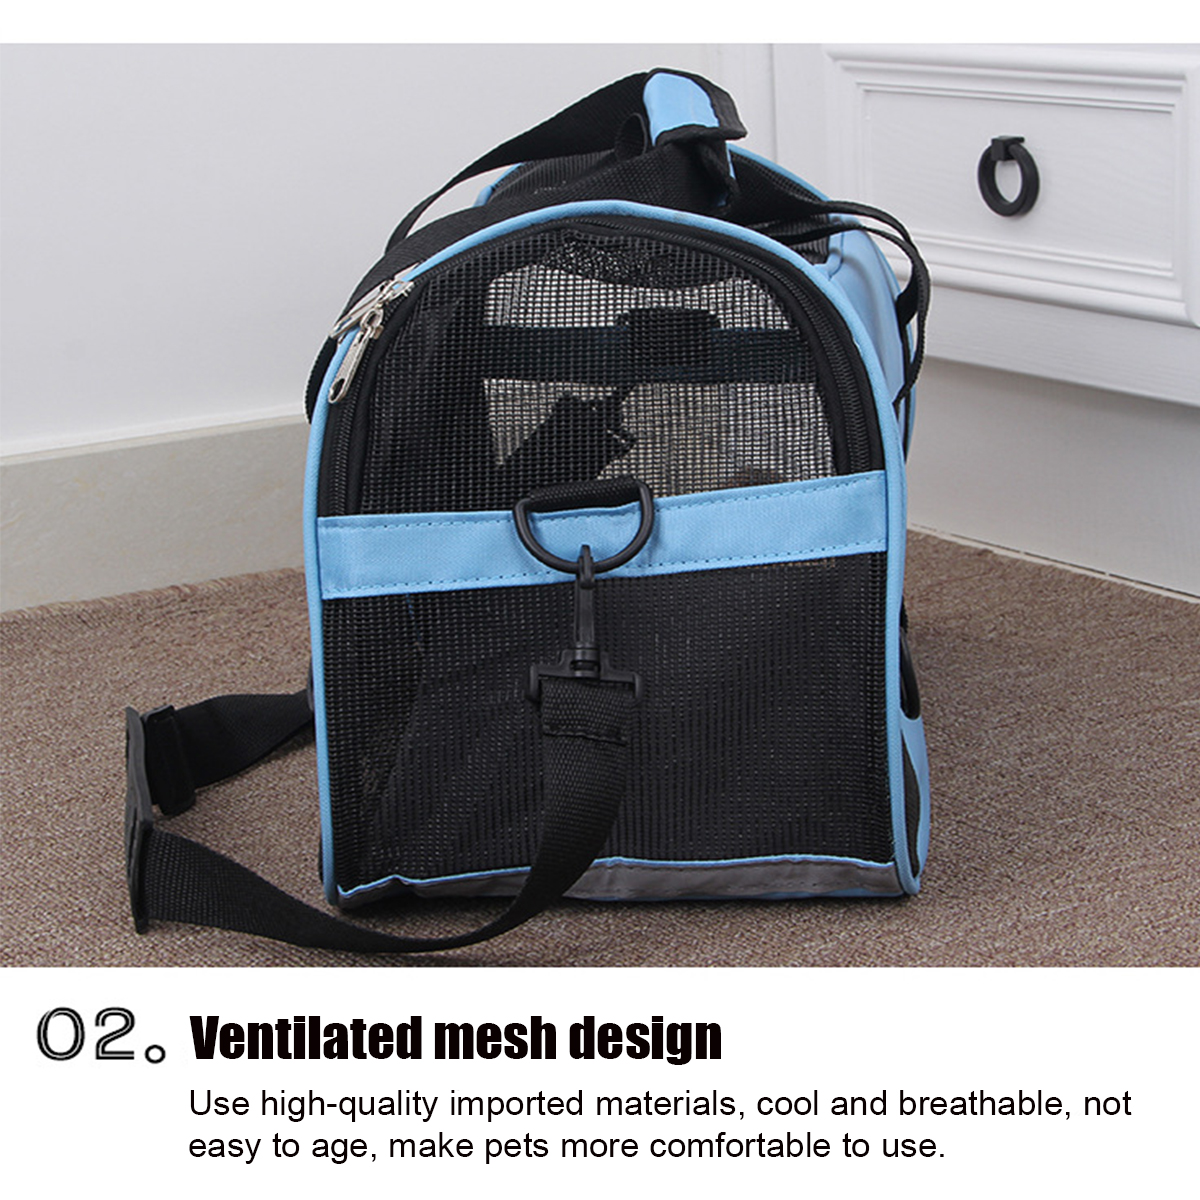 Portable-Dog-Cat-Carrier-Bag-Soft-sided-Pet-Puppy-Travel-Bags-Breathable-Mesh-Small-Pet-Chihuahua-Ca-1789561-4